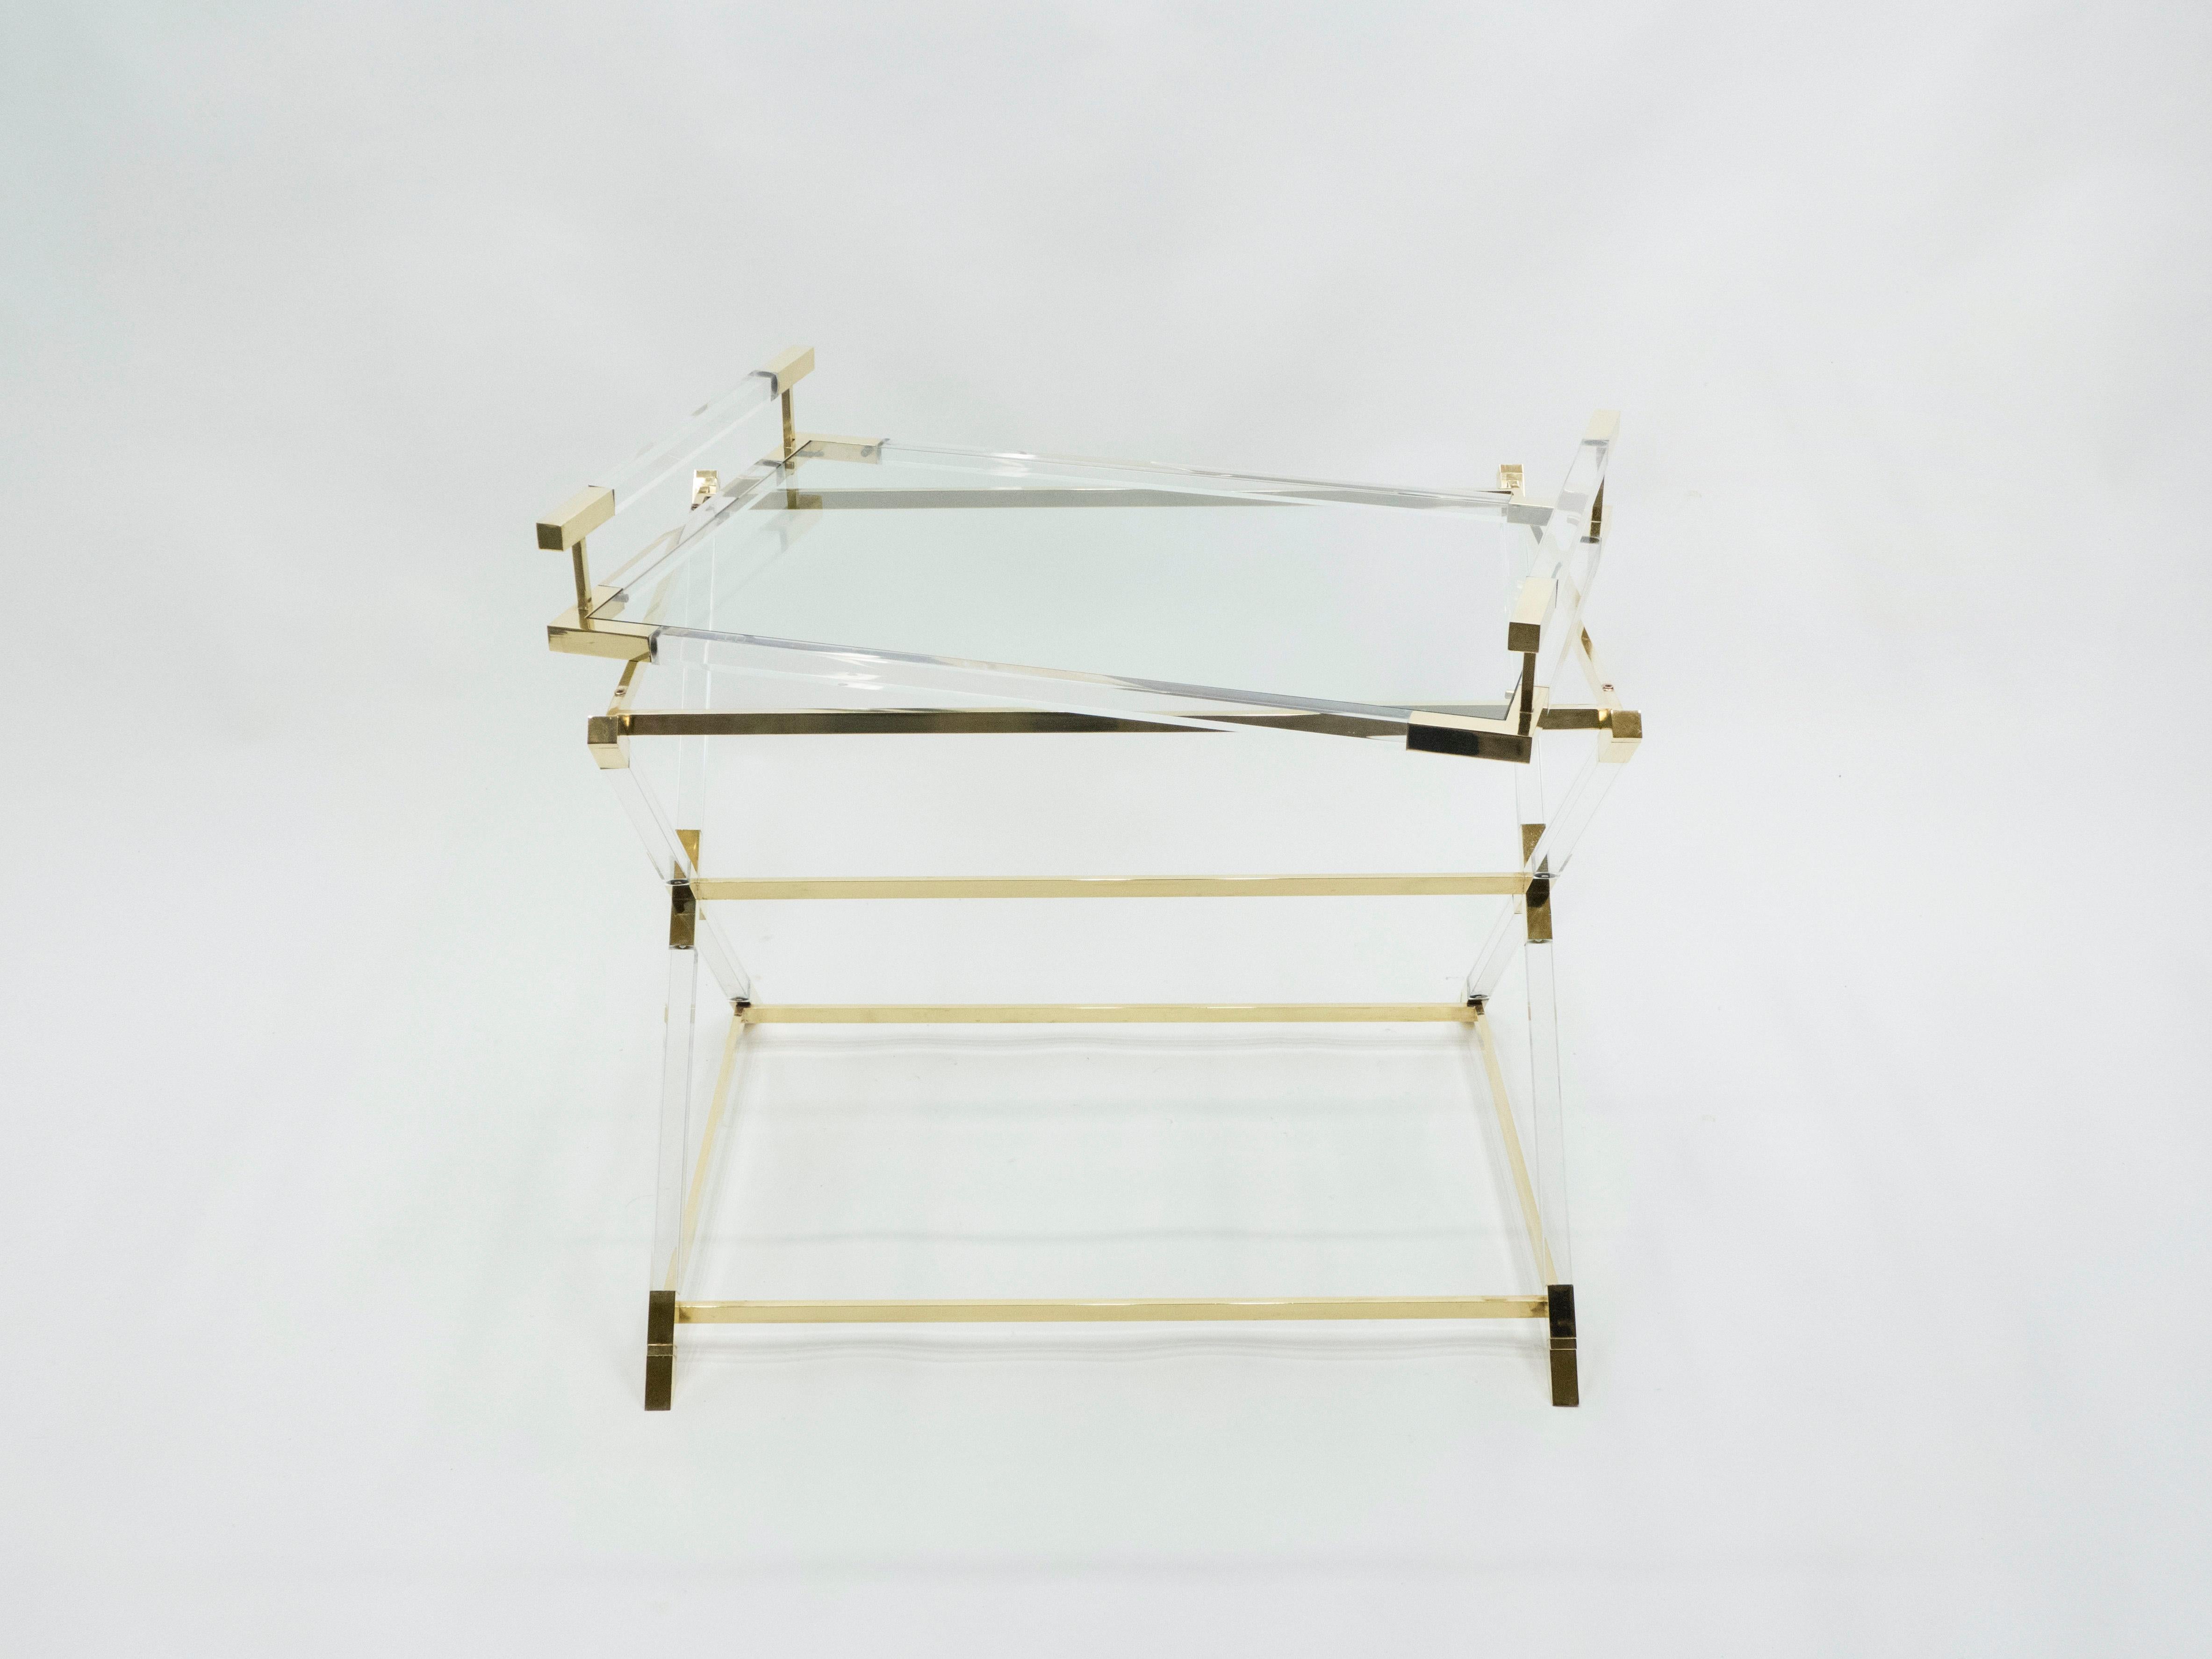 Rare French Side Tray Table Lucite and Brass Maison Jansen, 1970s For Sale 1